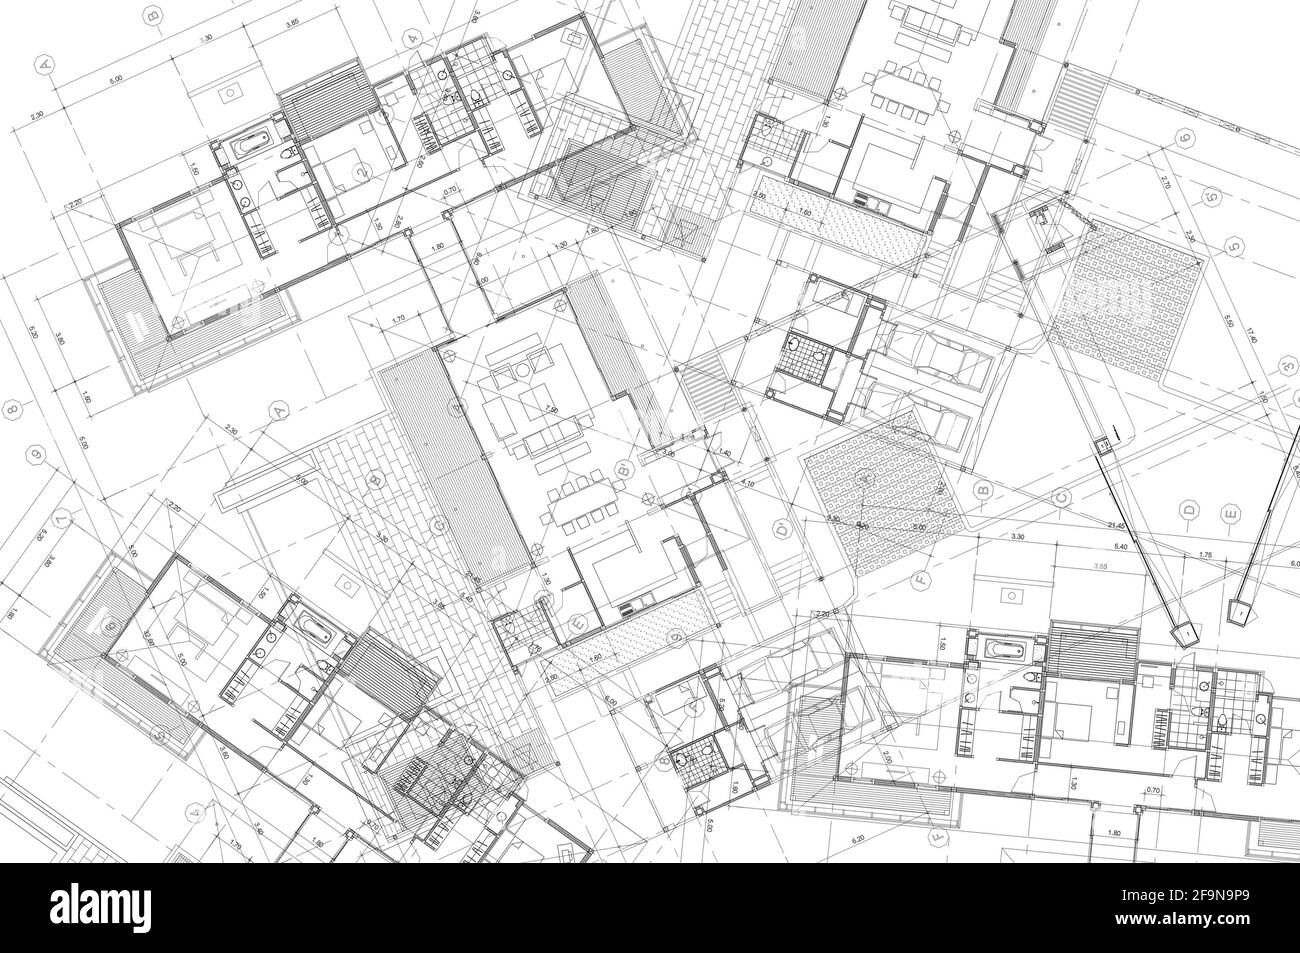 Architectural or shop drawing on white background Stock Photo